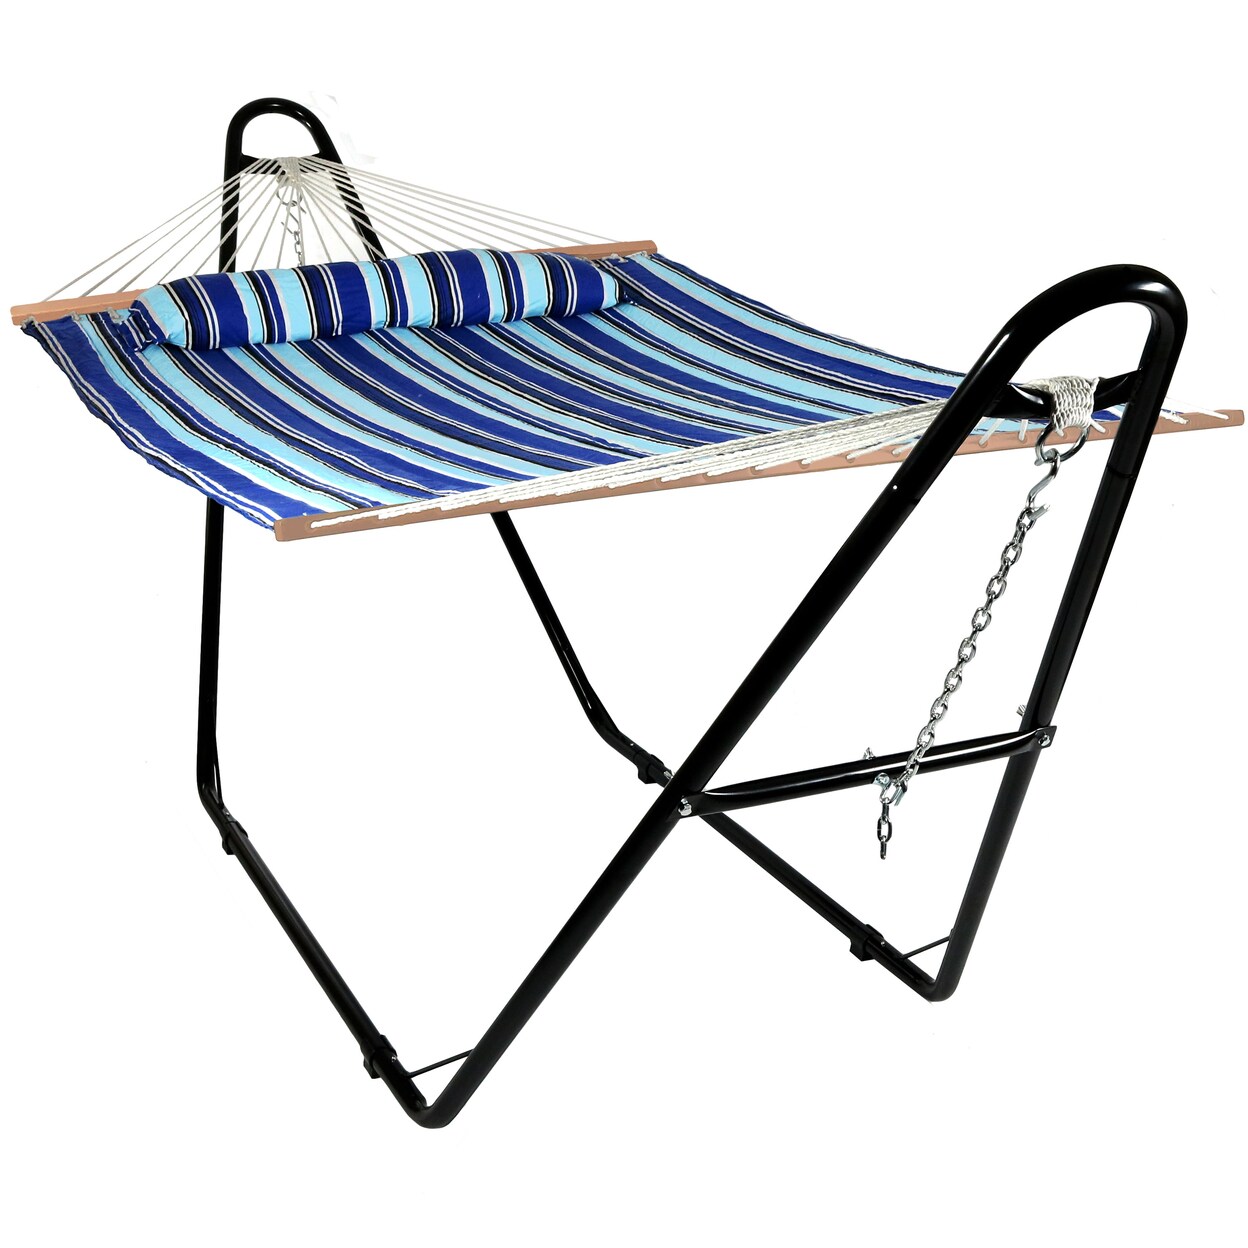 Sunnydaze   Large Quilted Hammock with Universal Steel Stand - Catalina Beach